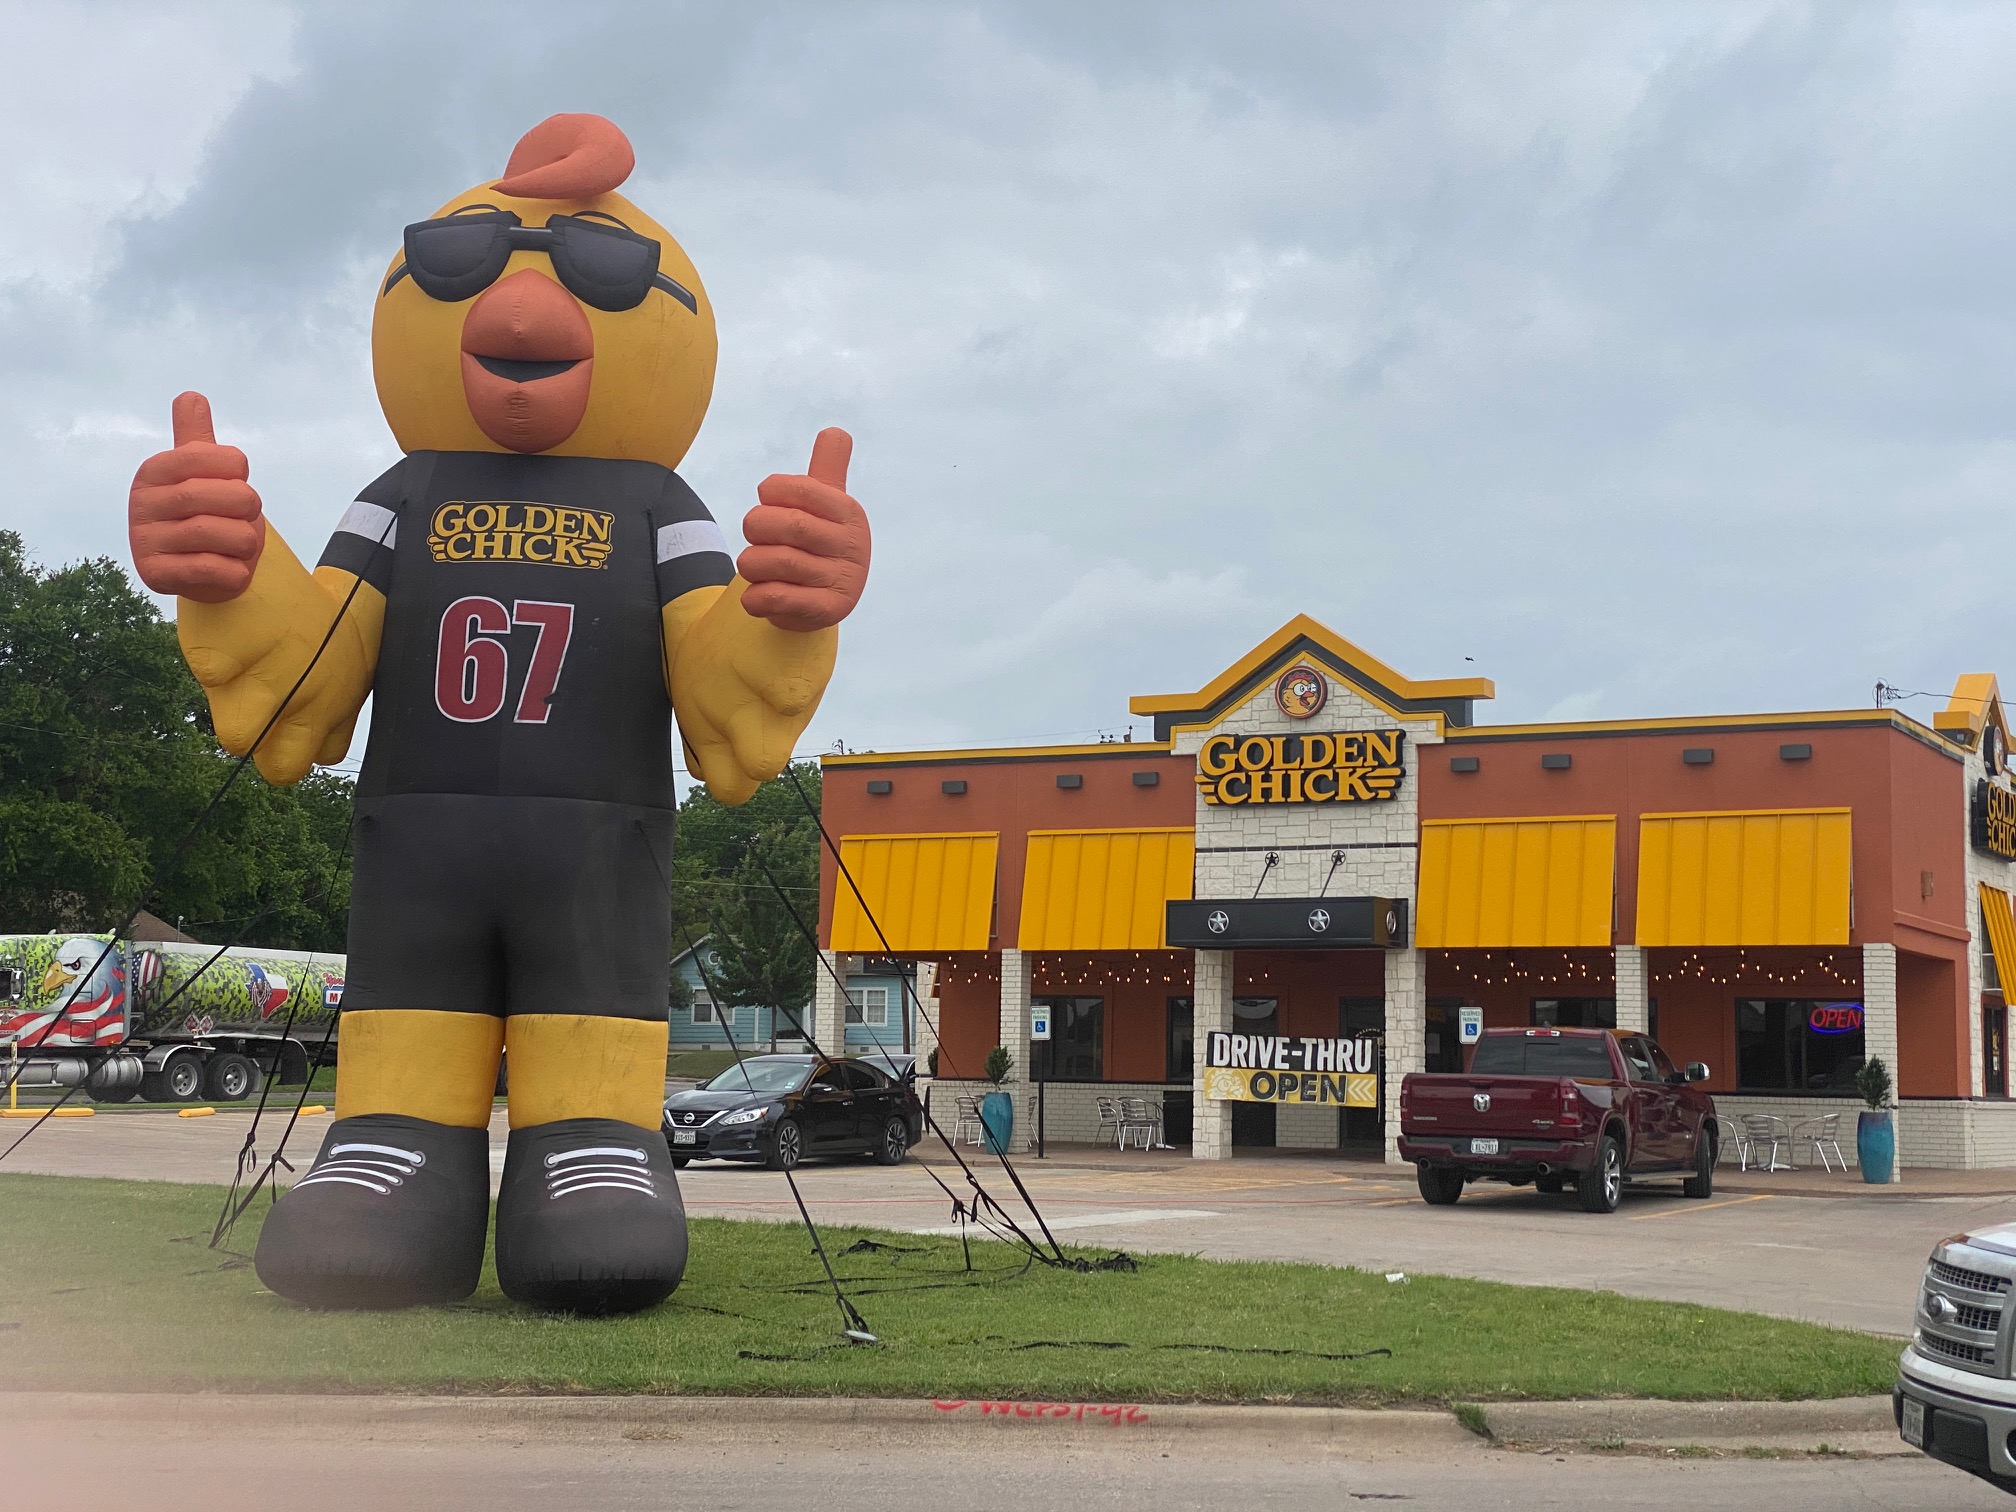 Golden Chick storefront.  Your local Golden Chick fast food restaurant in Waco, Texas